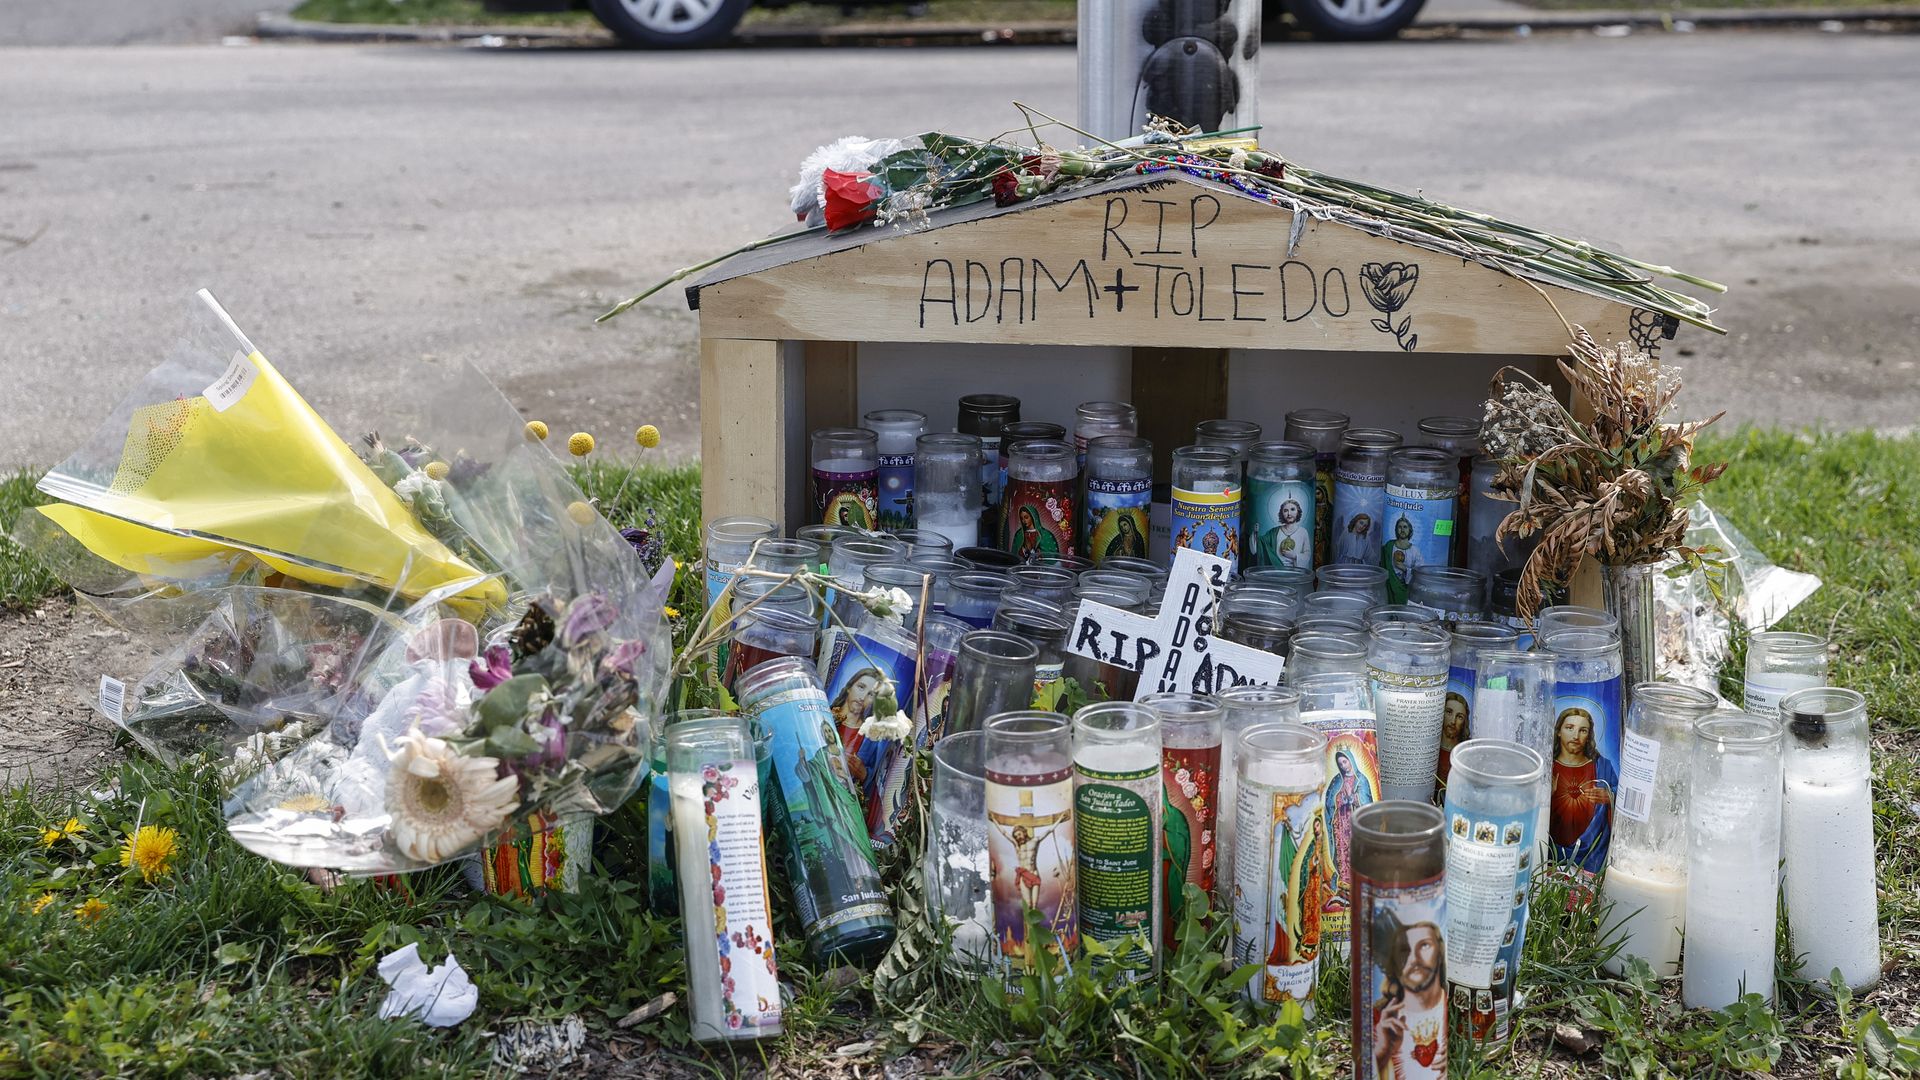 A small memorial of flowers and candles to Adam Toledo in Chicago